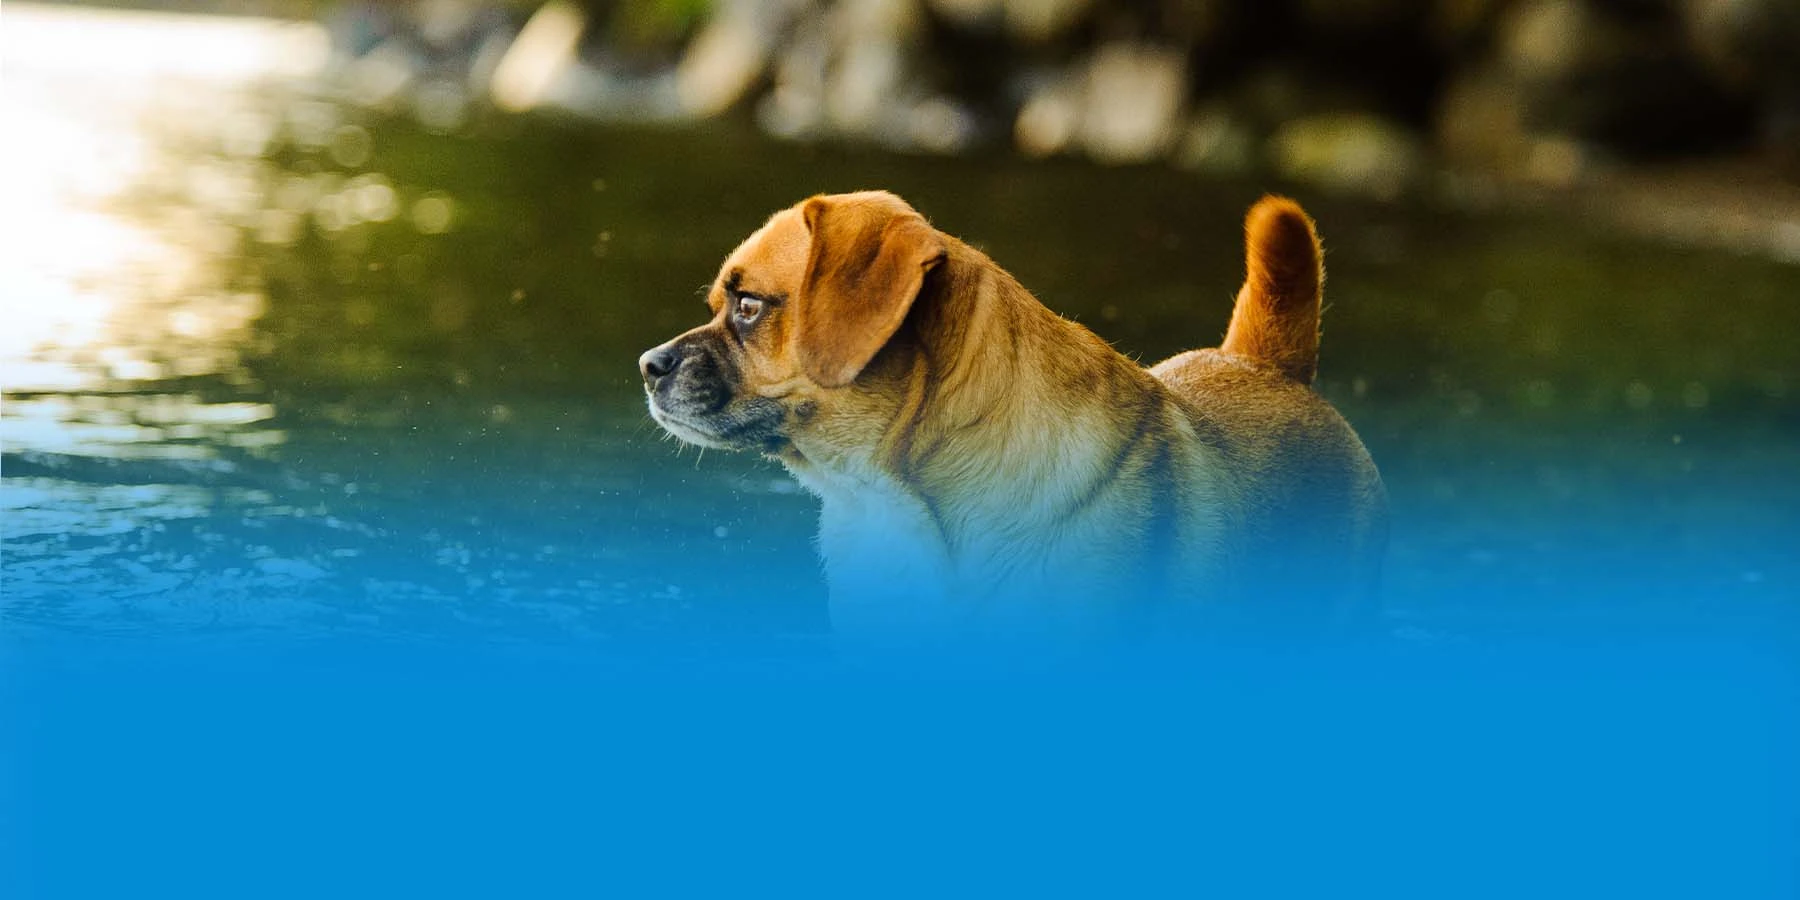 Puggle dog outdoors standing in water.